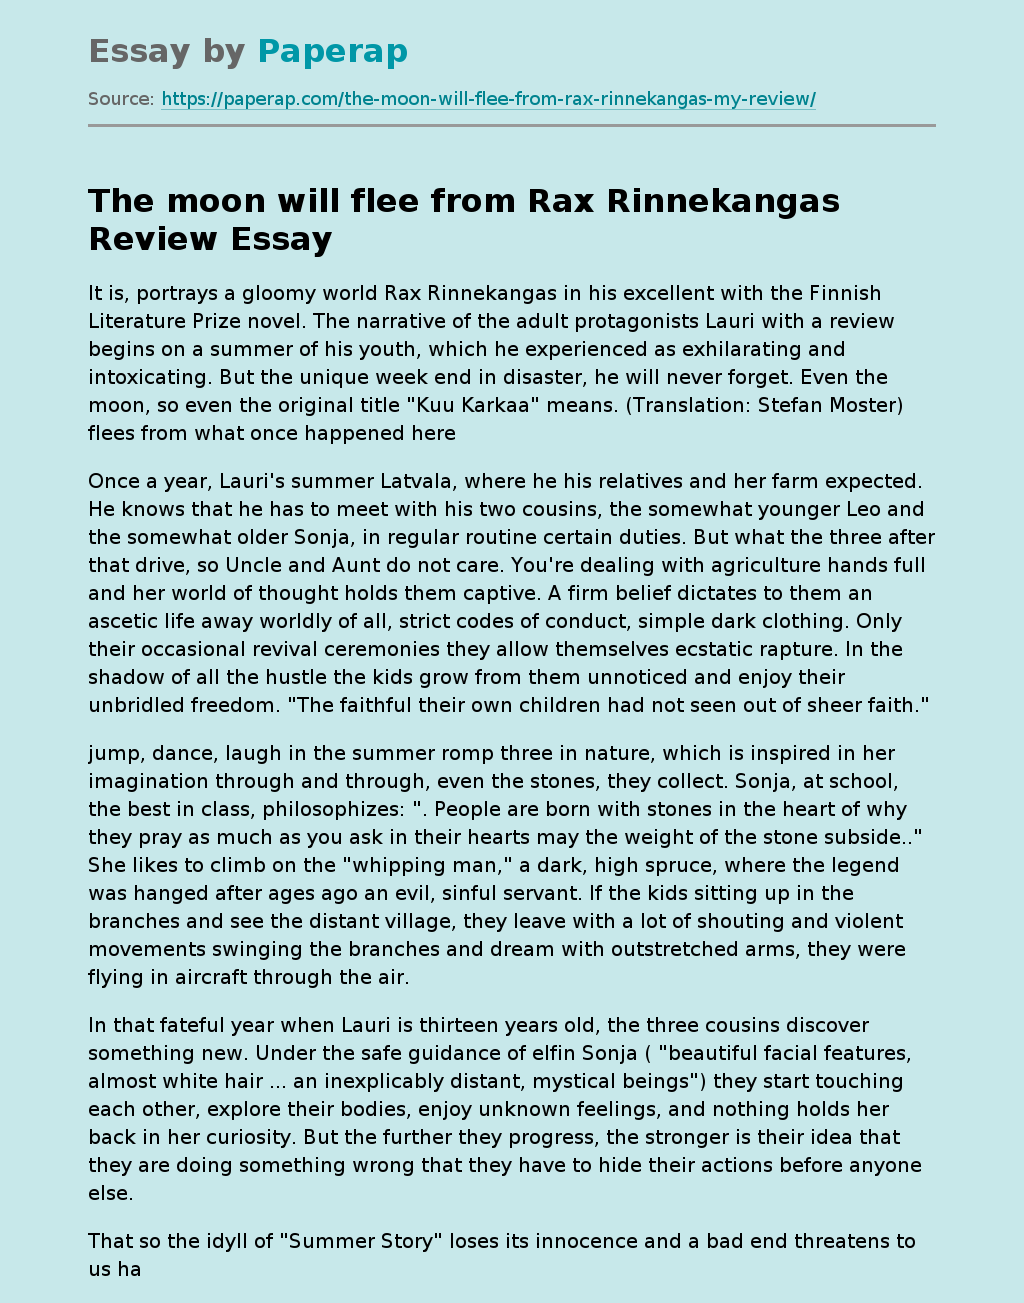 The moon will flee from Rax Rinnekangas Review